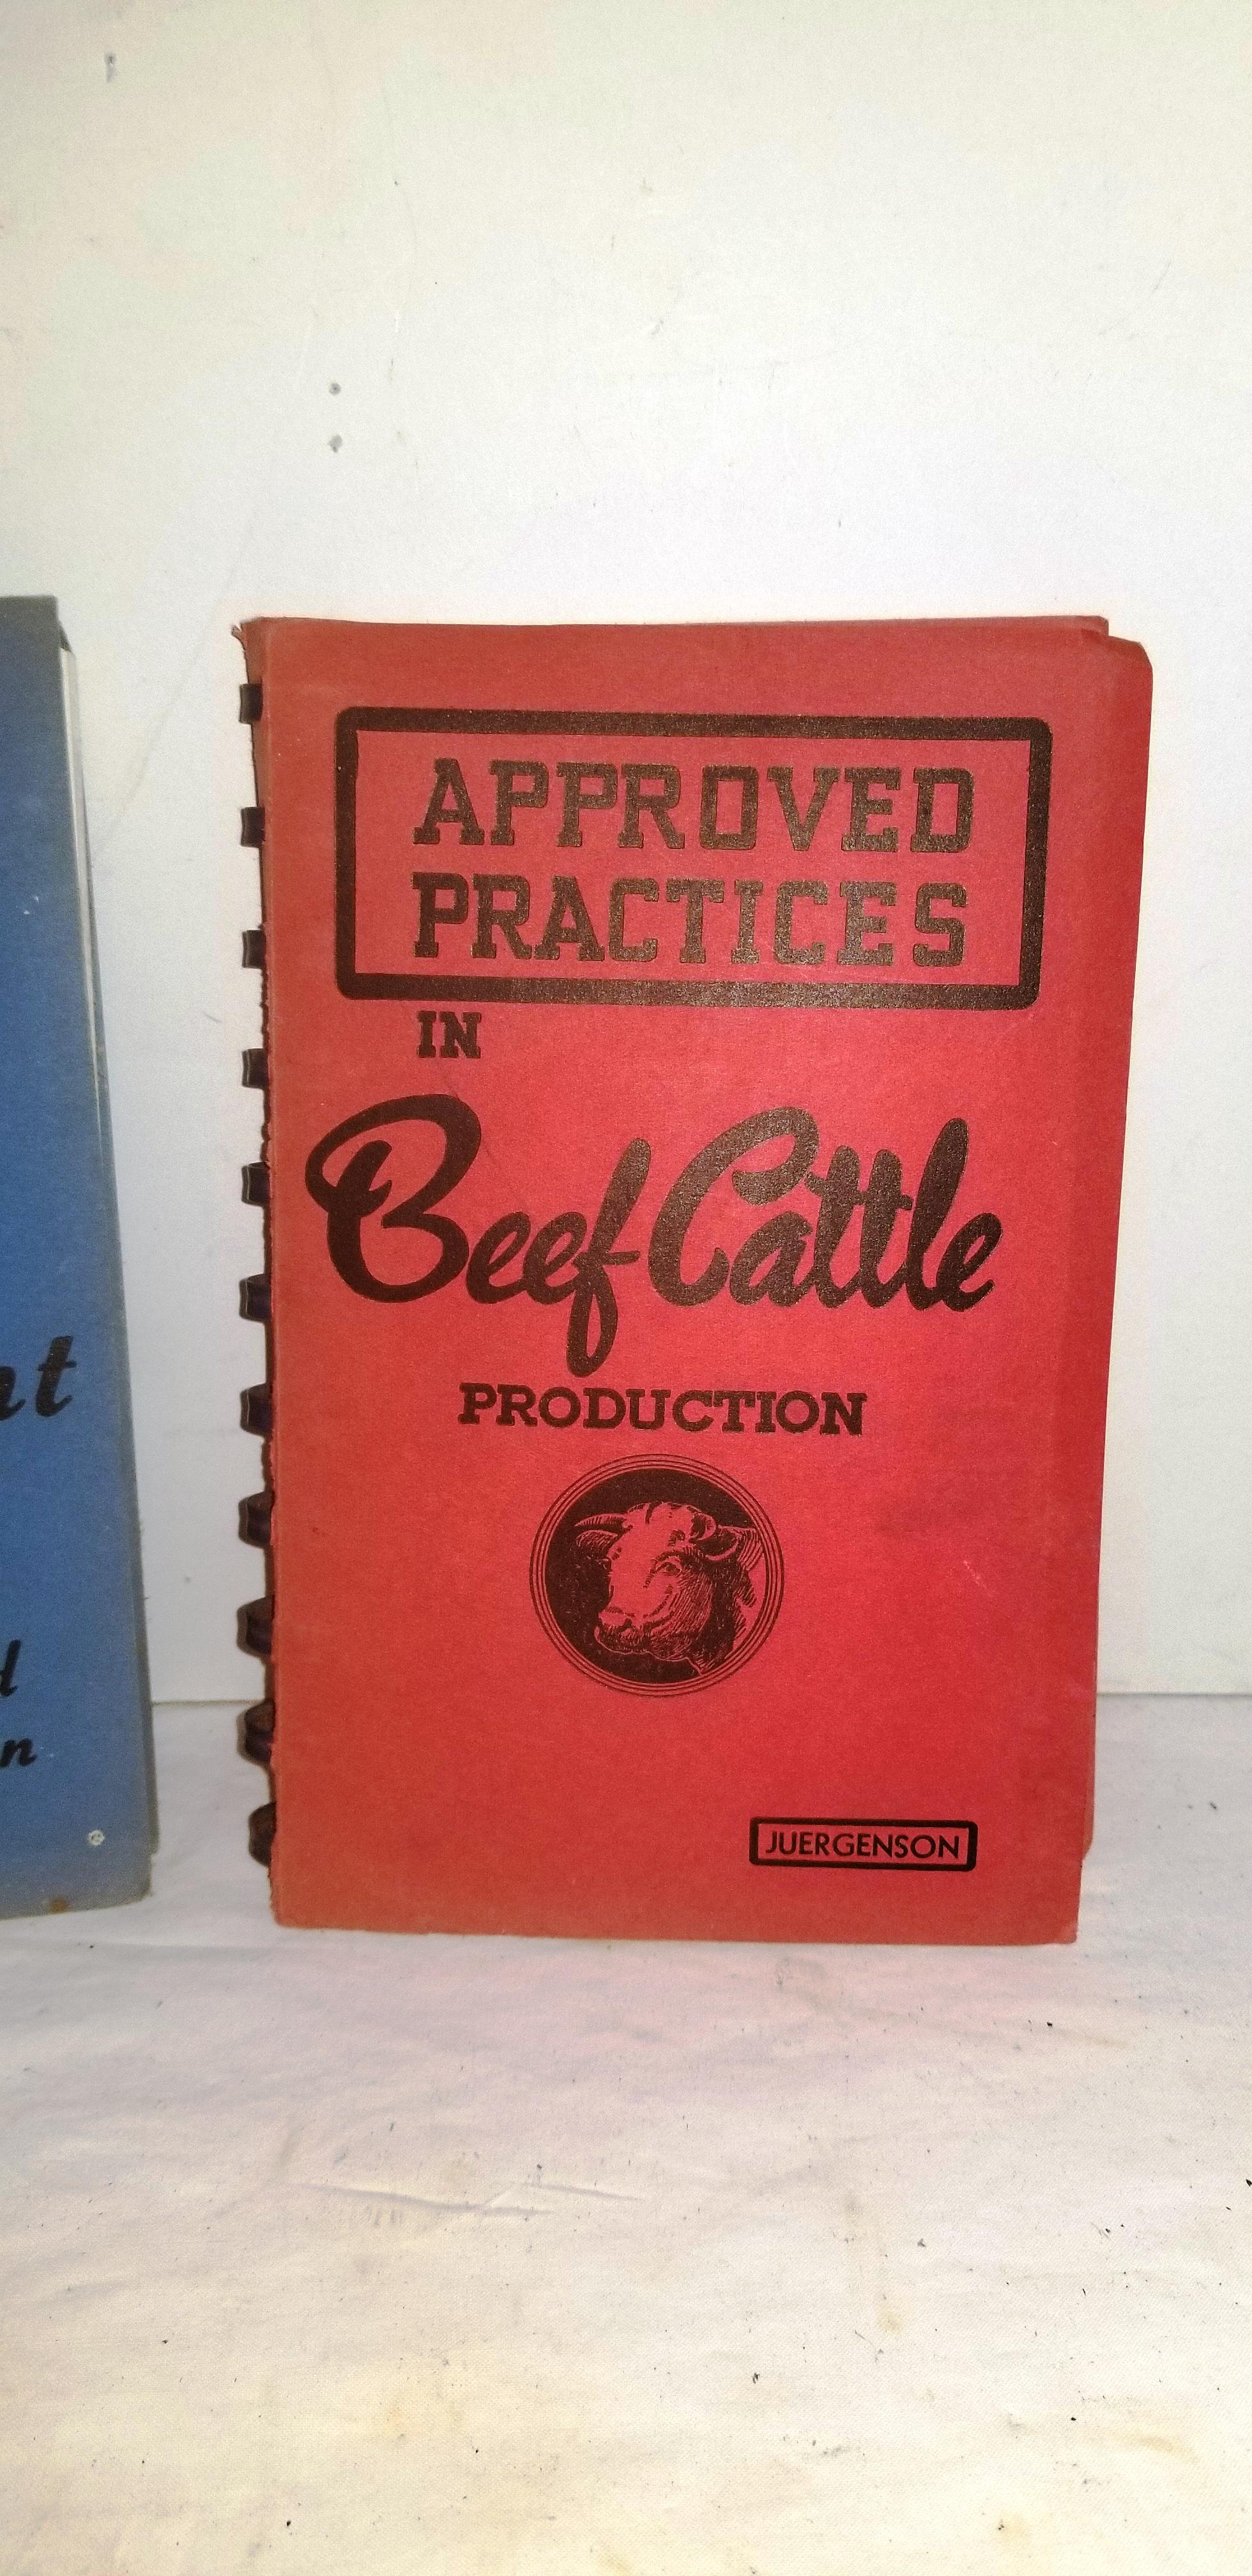 1950'S APPROVED PRACTICES IN BEEF CATTLE PRODUCTION & FARM MANAGEMENT BOOKS